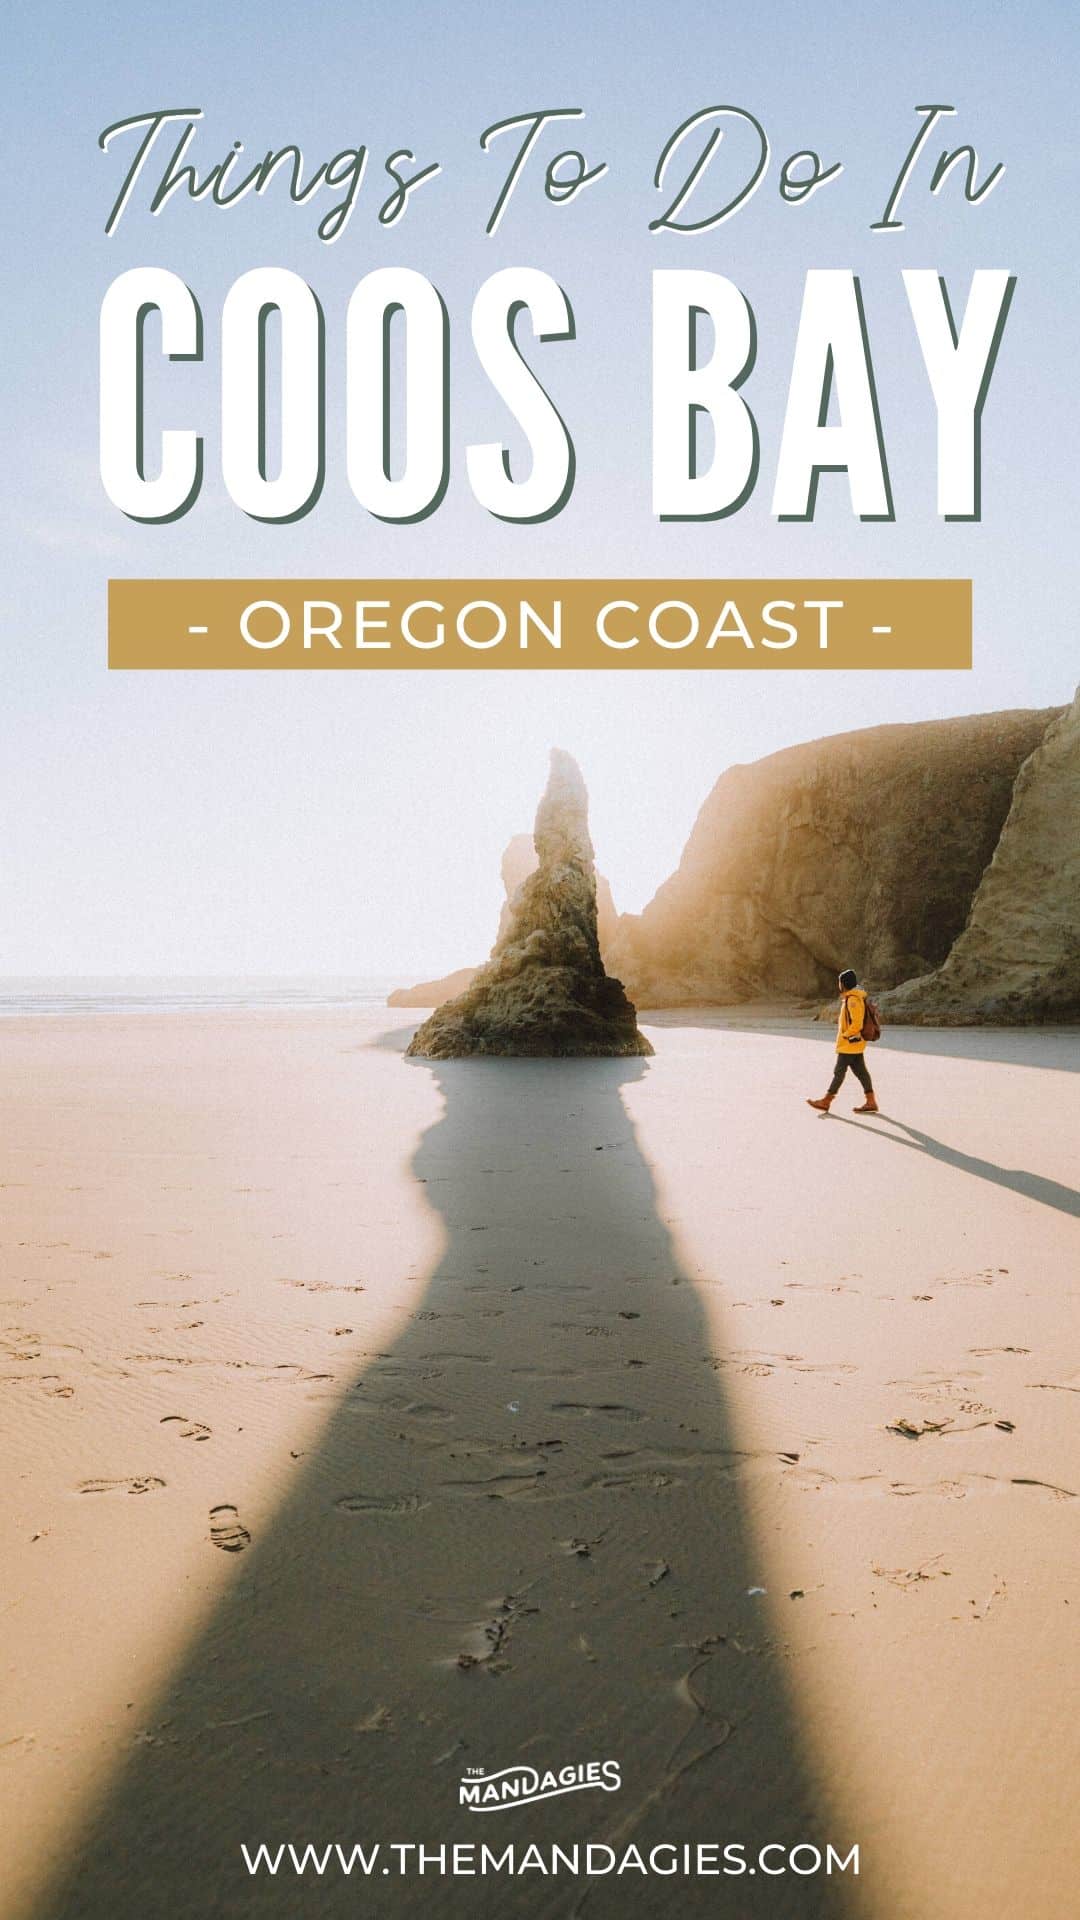 Driving down the Oregon coast and looking for epic adventures in the Pacific Northwest? We're sharing all the best things to do in Coos Bay (and nearby!) to pack your itinerary with beautiful stops. Save this post for your next trip to the Oregon Coast! #roadtrip #oregon #oregoncoast #coosbay #pacificnorthwest #PNW #adventure #photography #USA #oregonstate